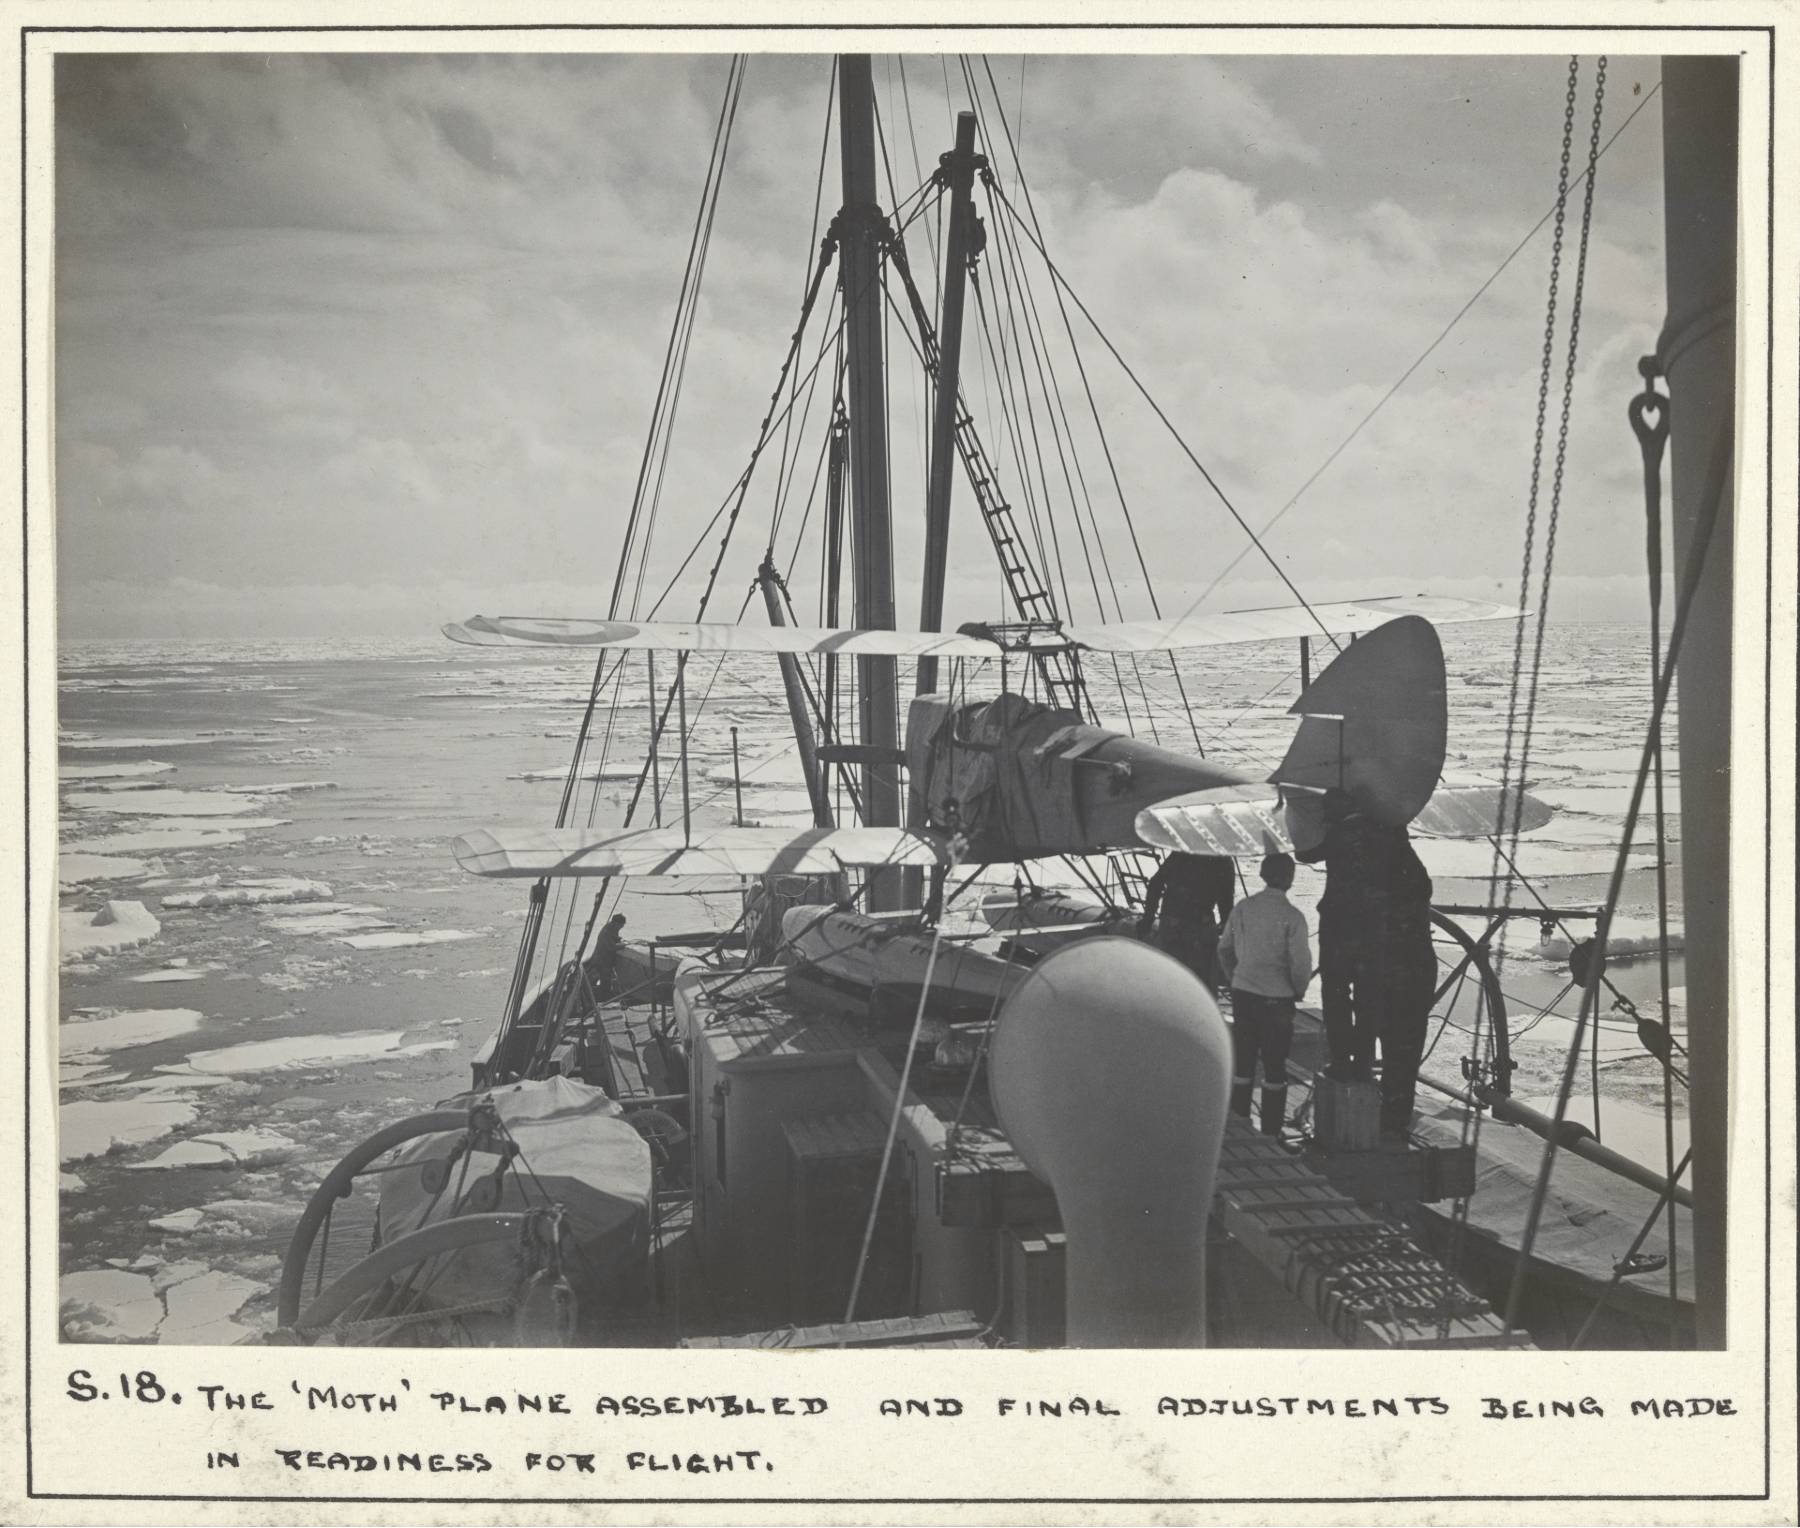 A seaplane sits on the deck of a ship. Icebergs can be seen in the ocean.